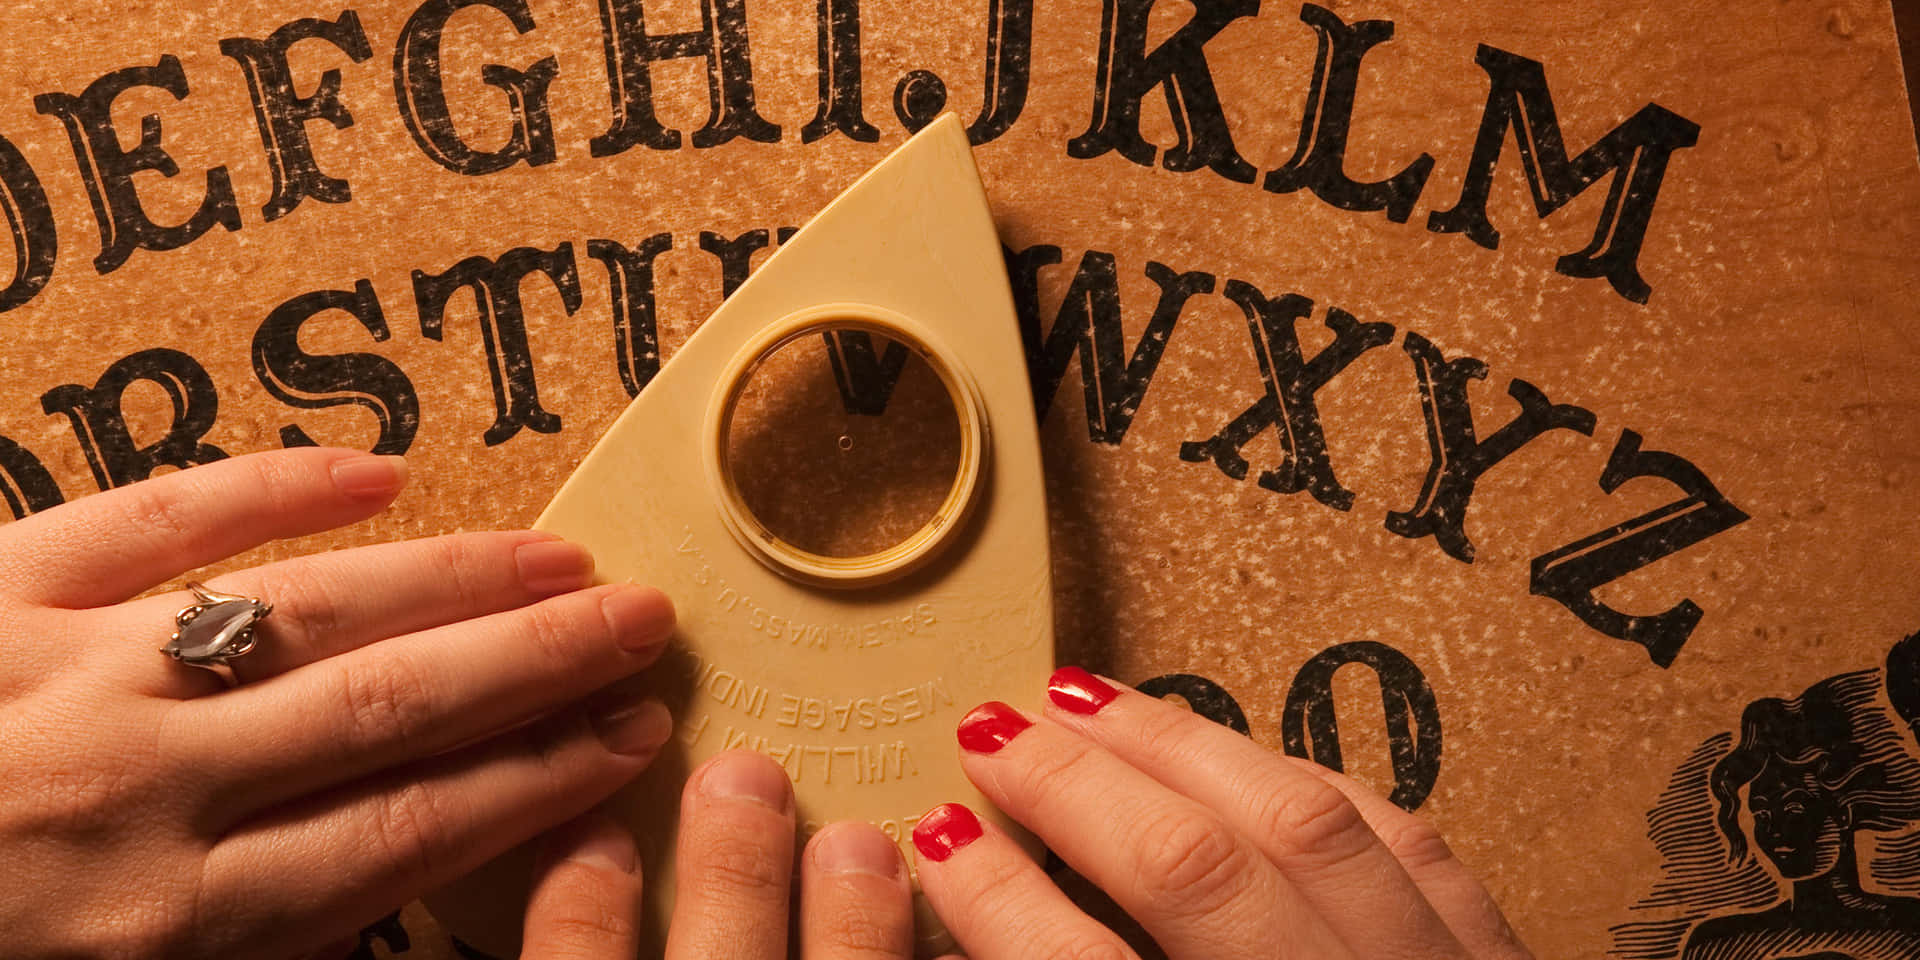 "Take the plunge into the paranormal realm with a Ouija board!"